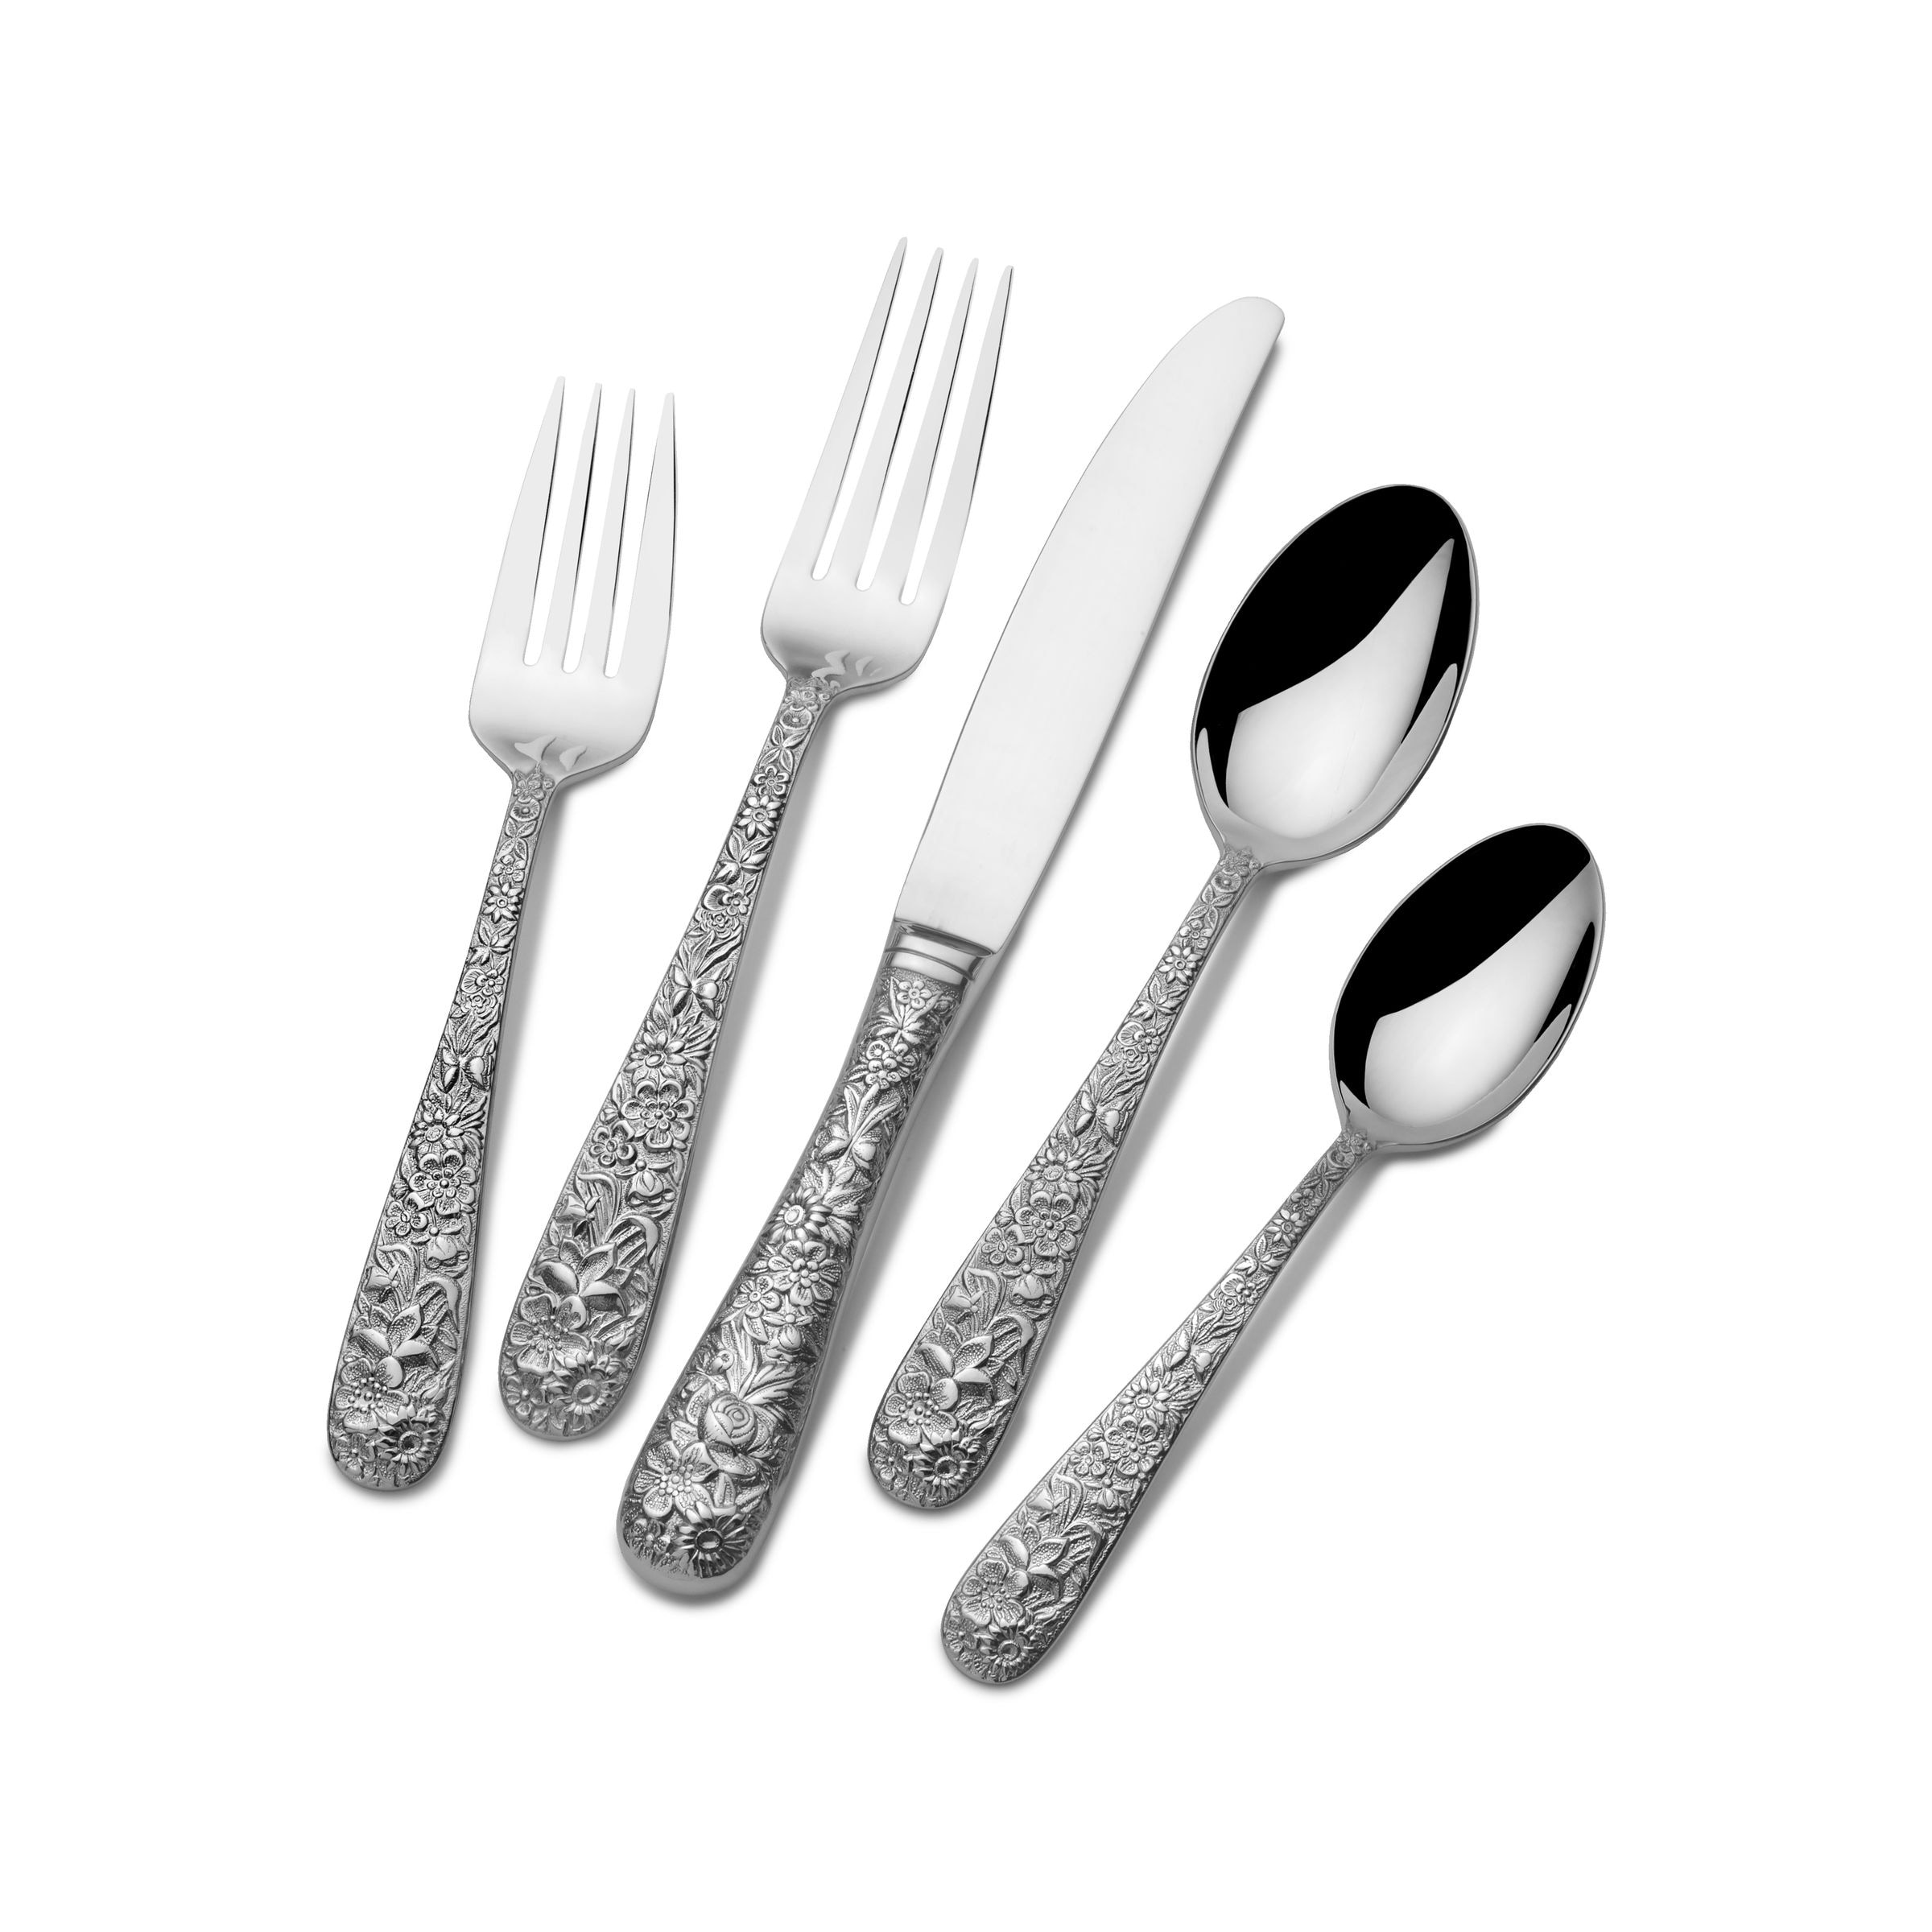 Towle Hammersmith 18/10 Stainless Steel 6 1/8 Teaspoon (Set of Four)